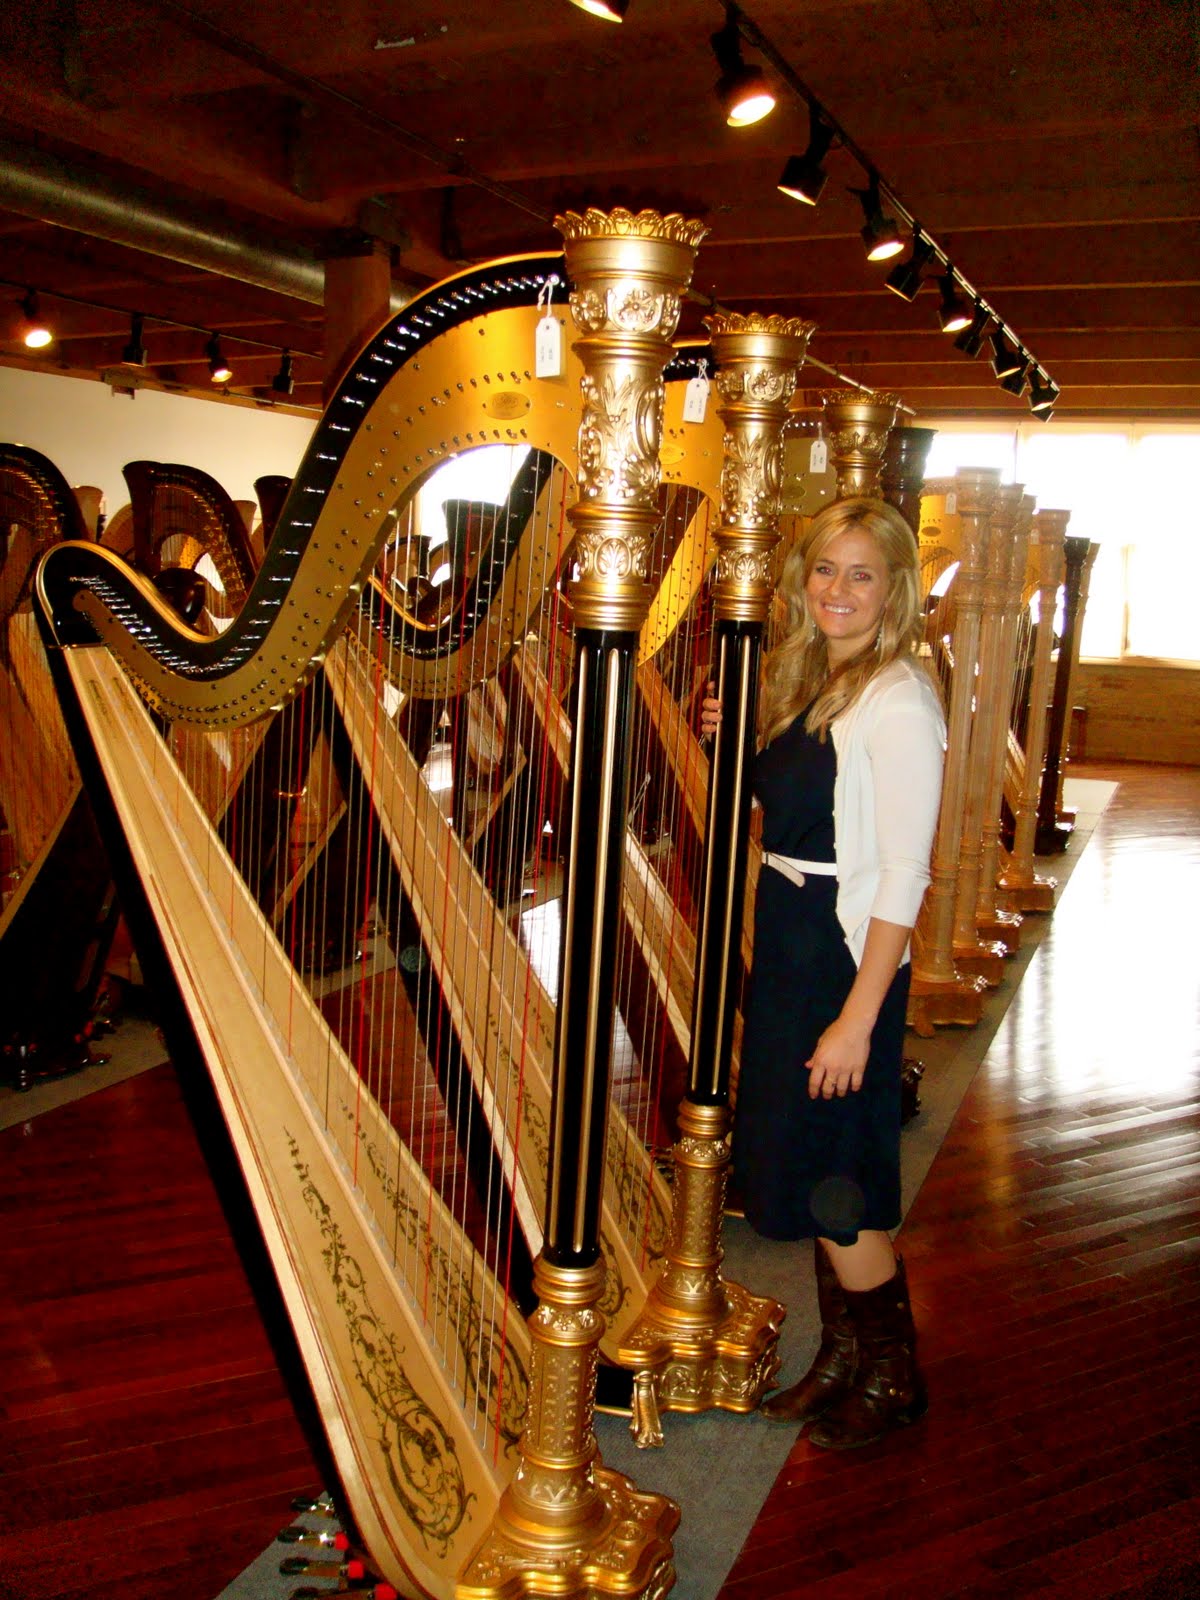 harp electric lyon healy harps yahooo could try